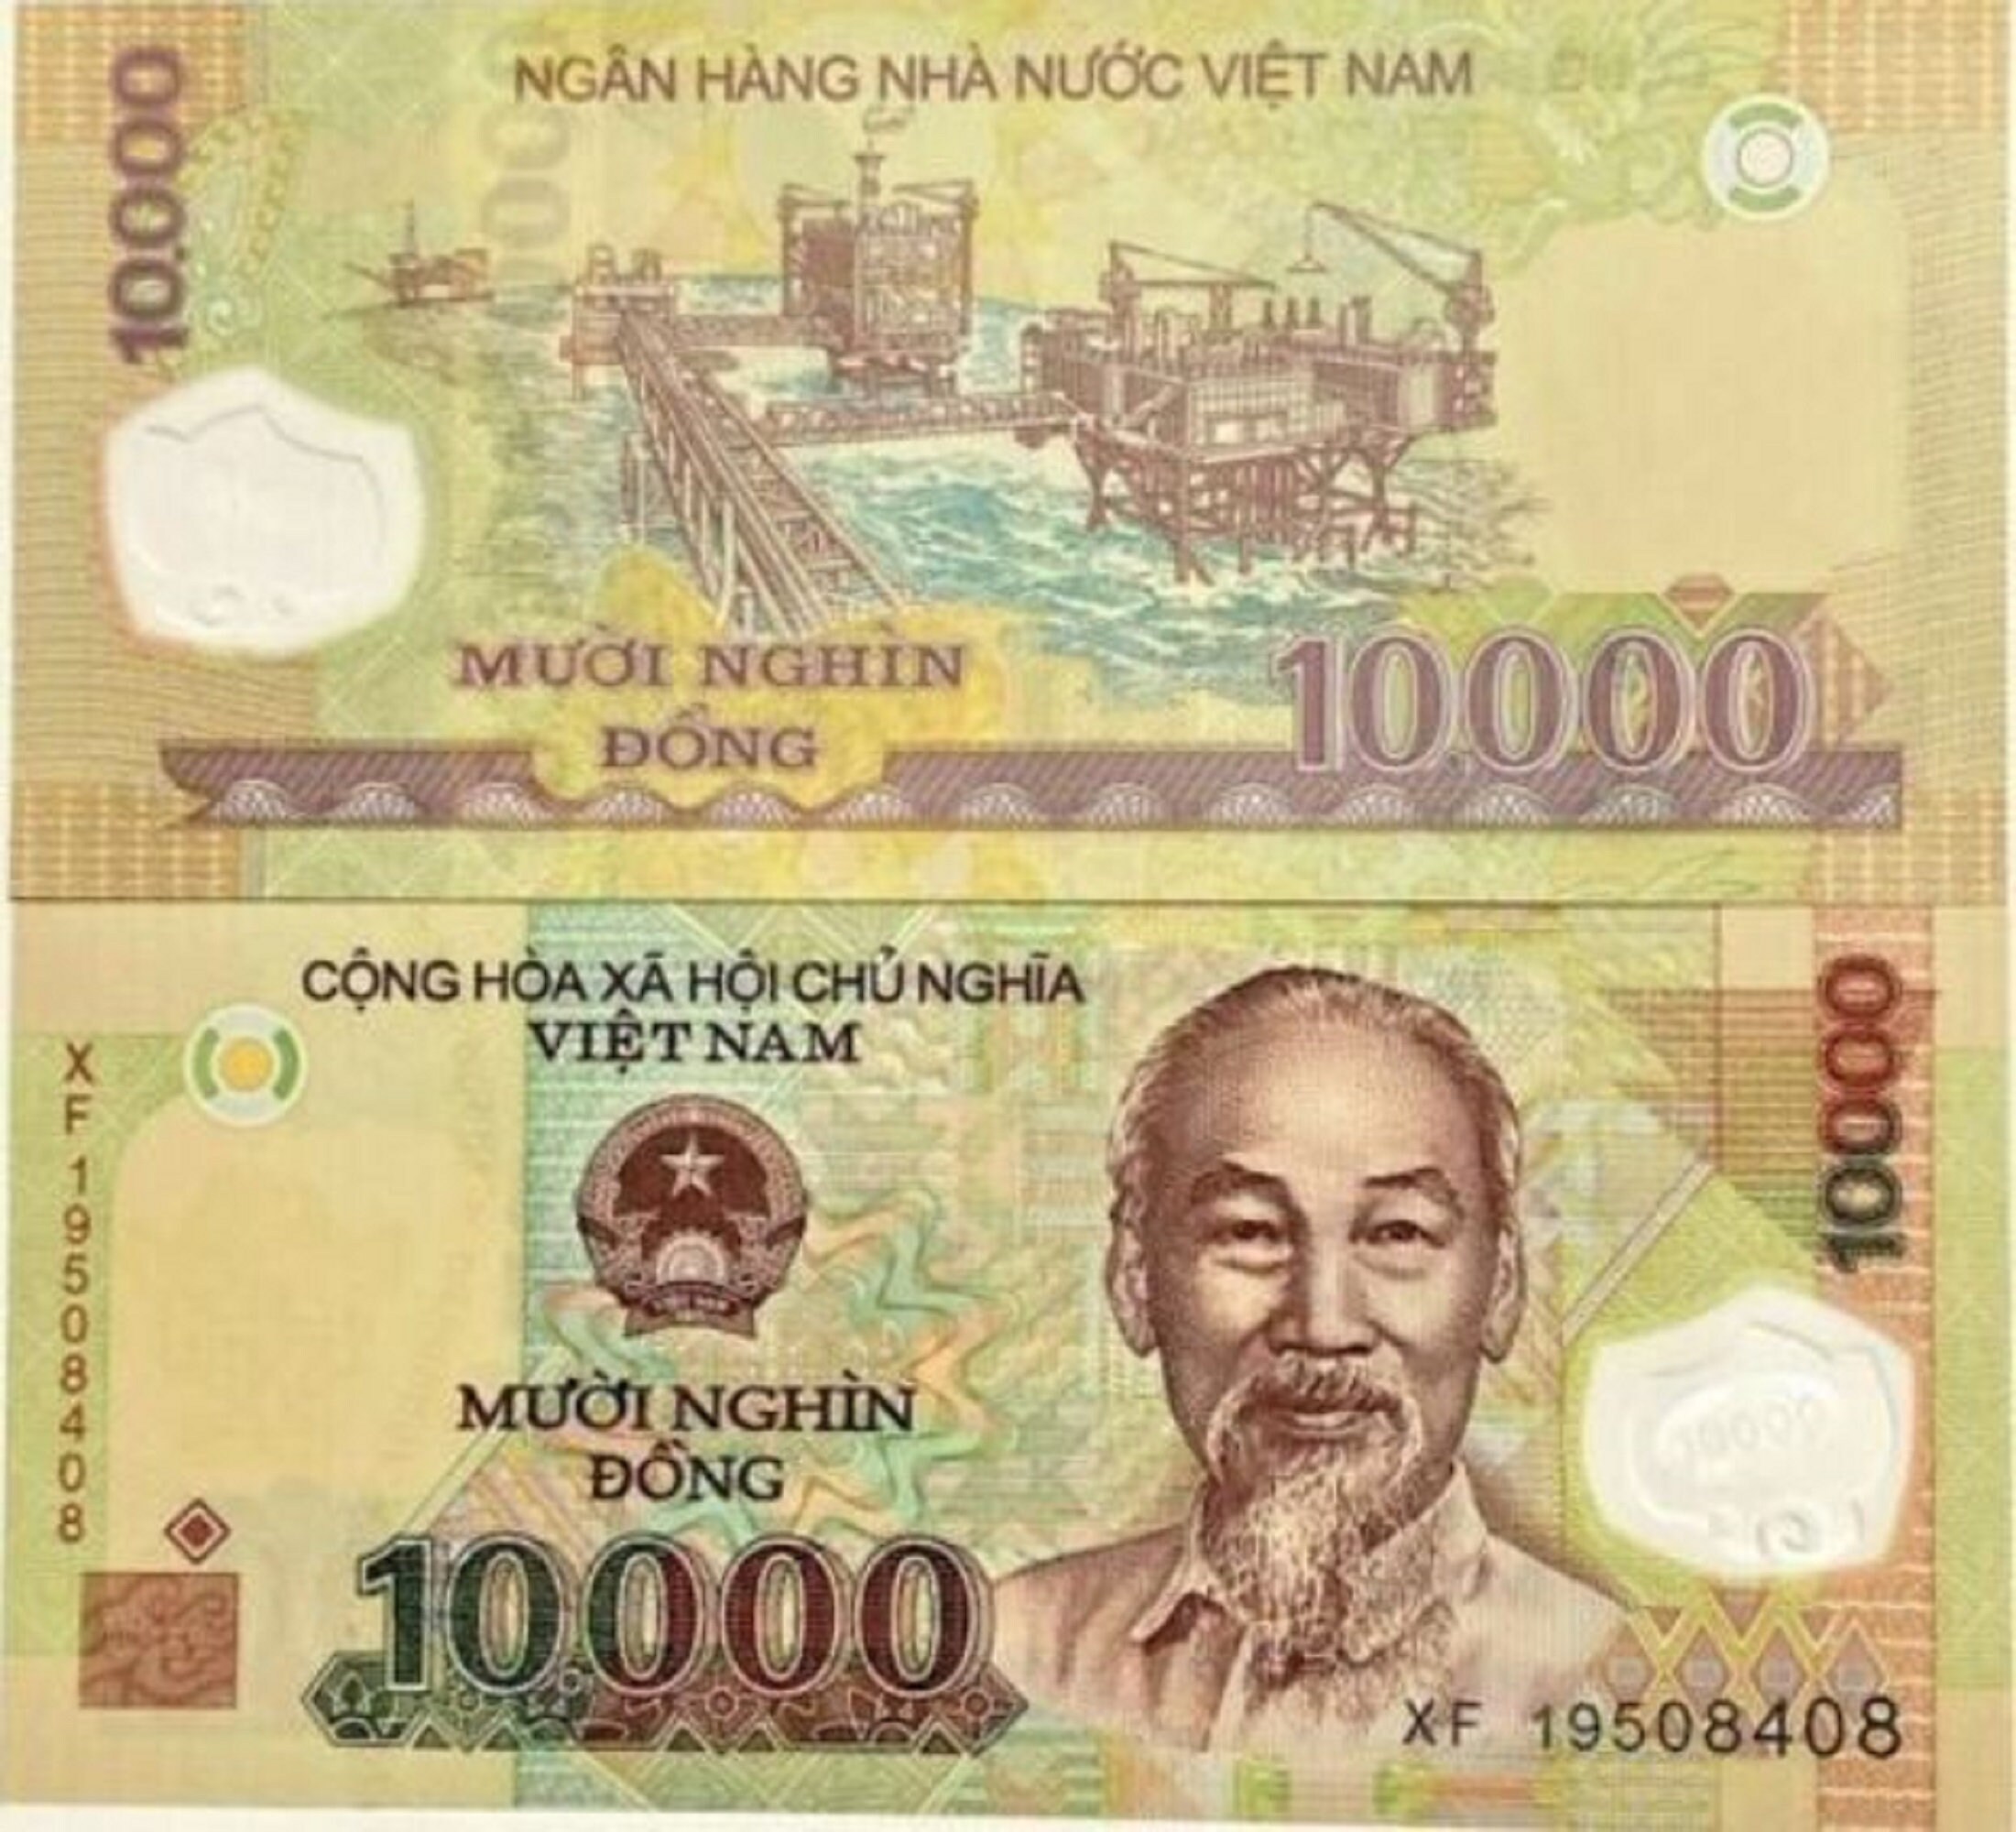 Polymer Series Muoi Nghin Dong Viet Nam UNC Banknote 10,000 VND 